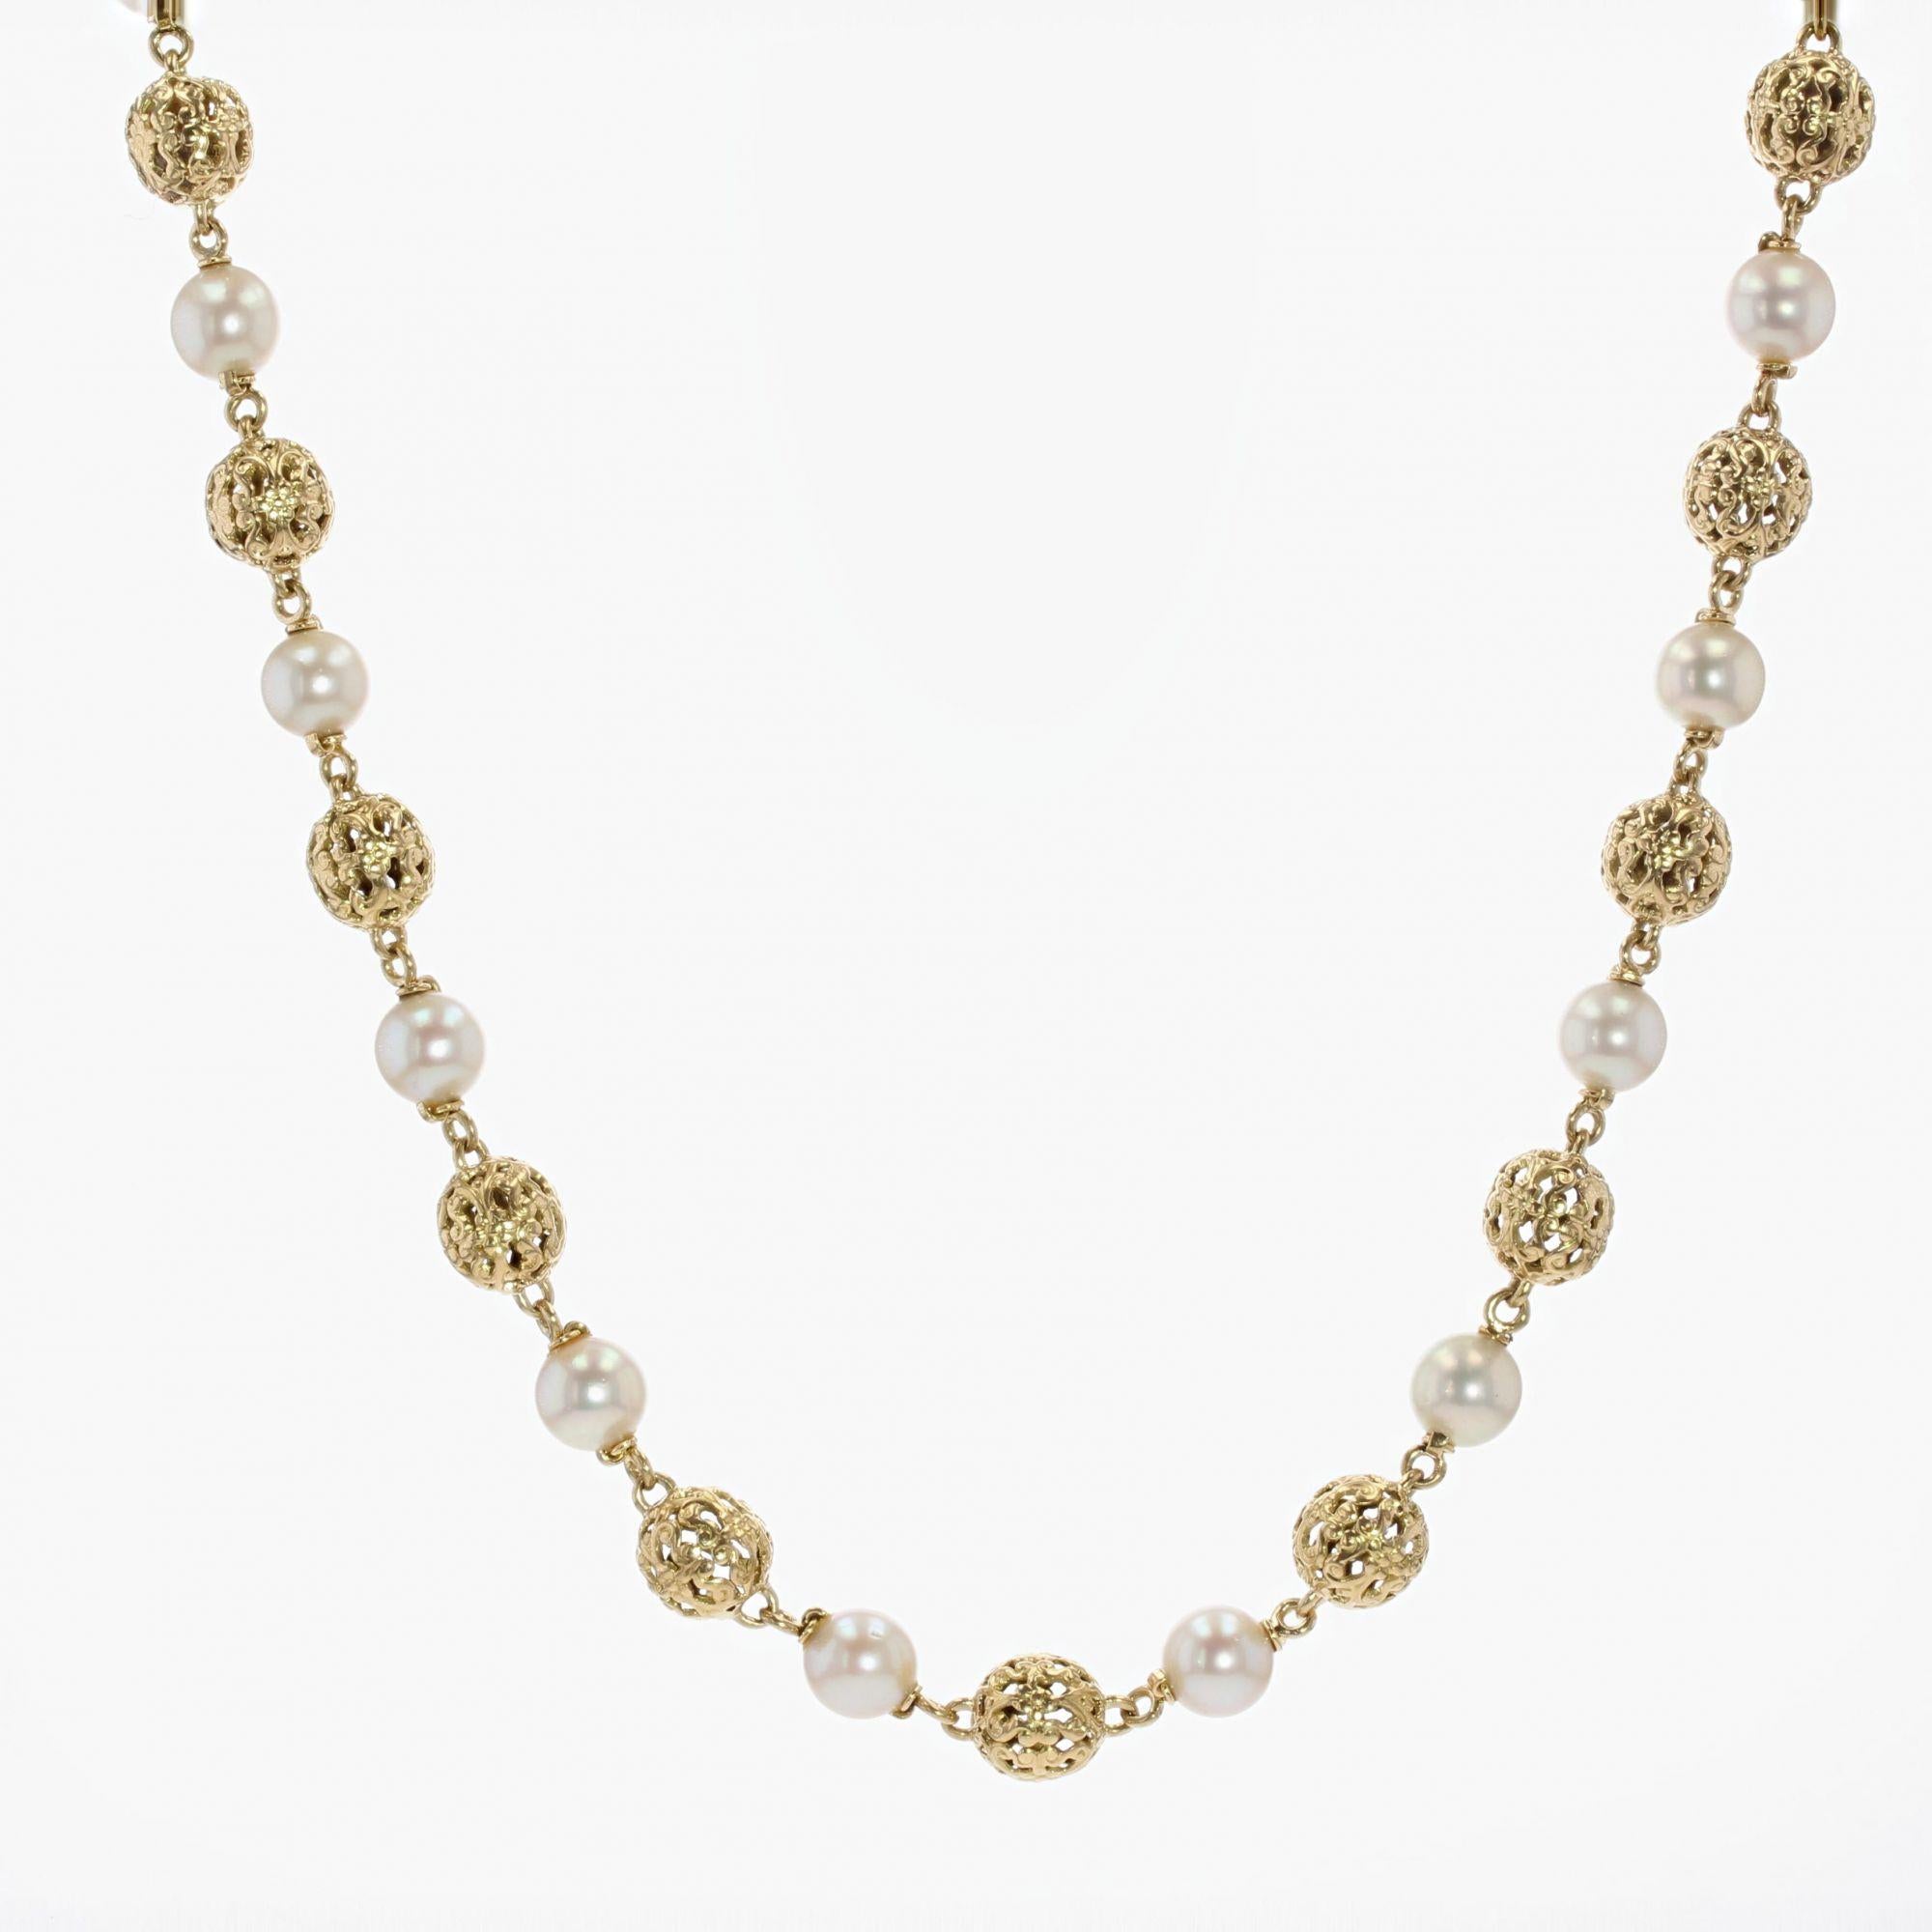 French 1960s 18 Karat Yellow Gold Cultured Pearls Convertible Necklace For Sale 6